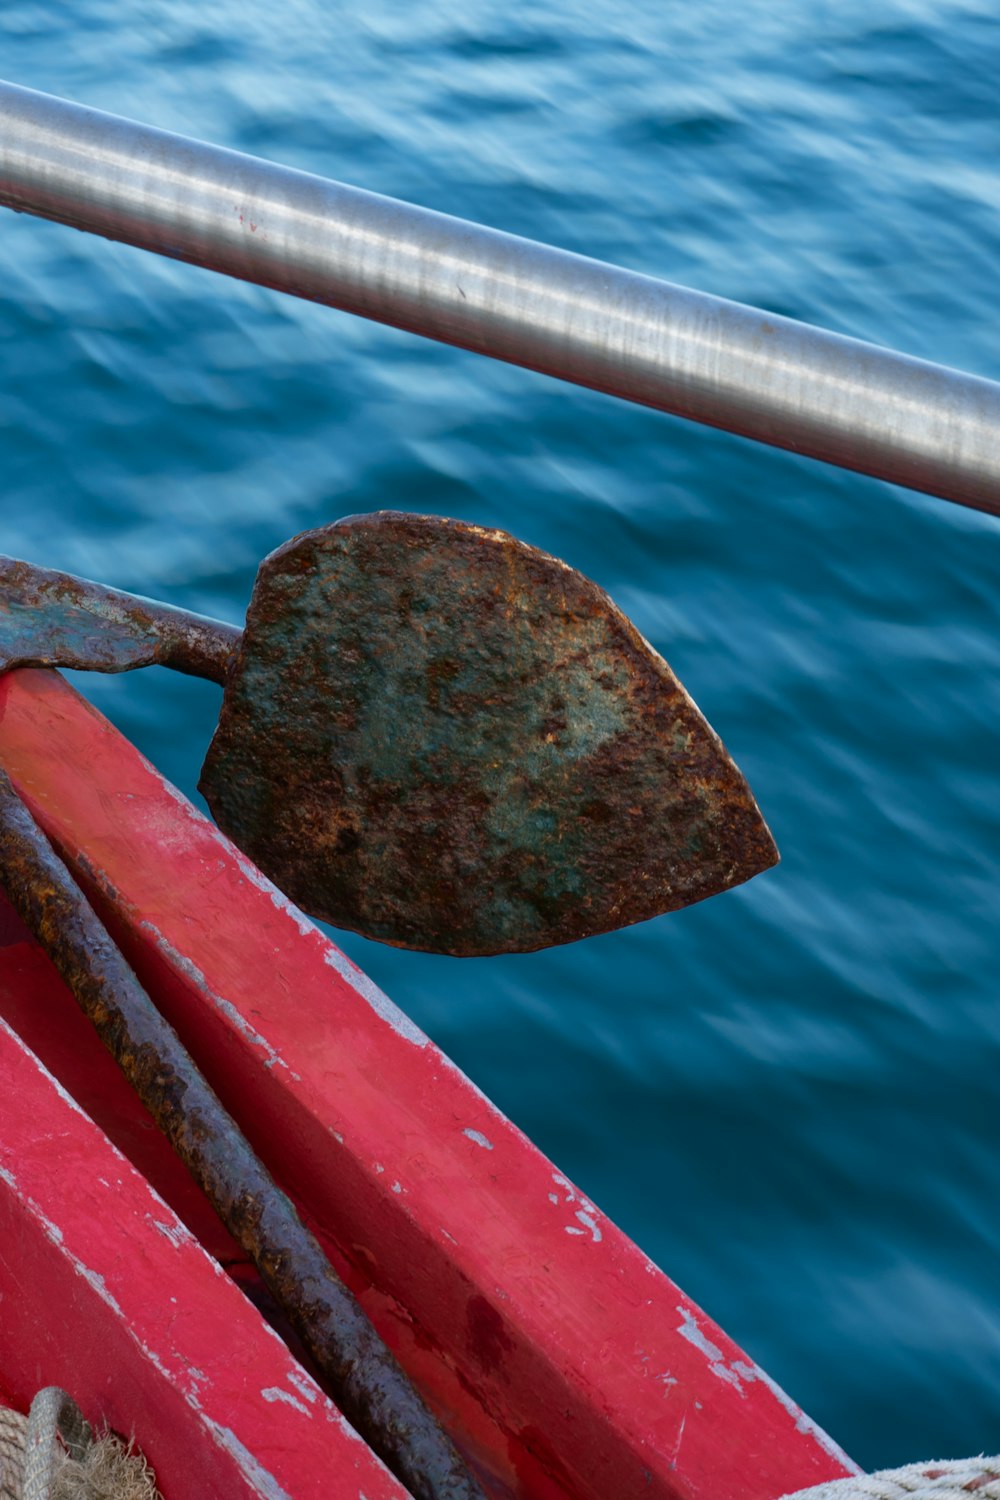 a rusted piece of metal sitting on top of a red boat